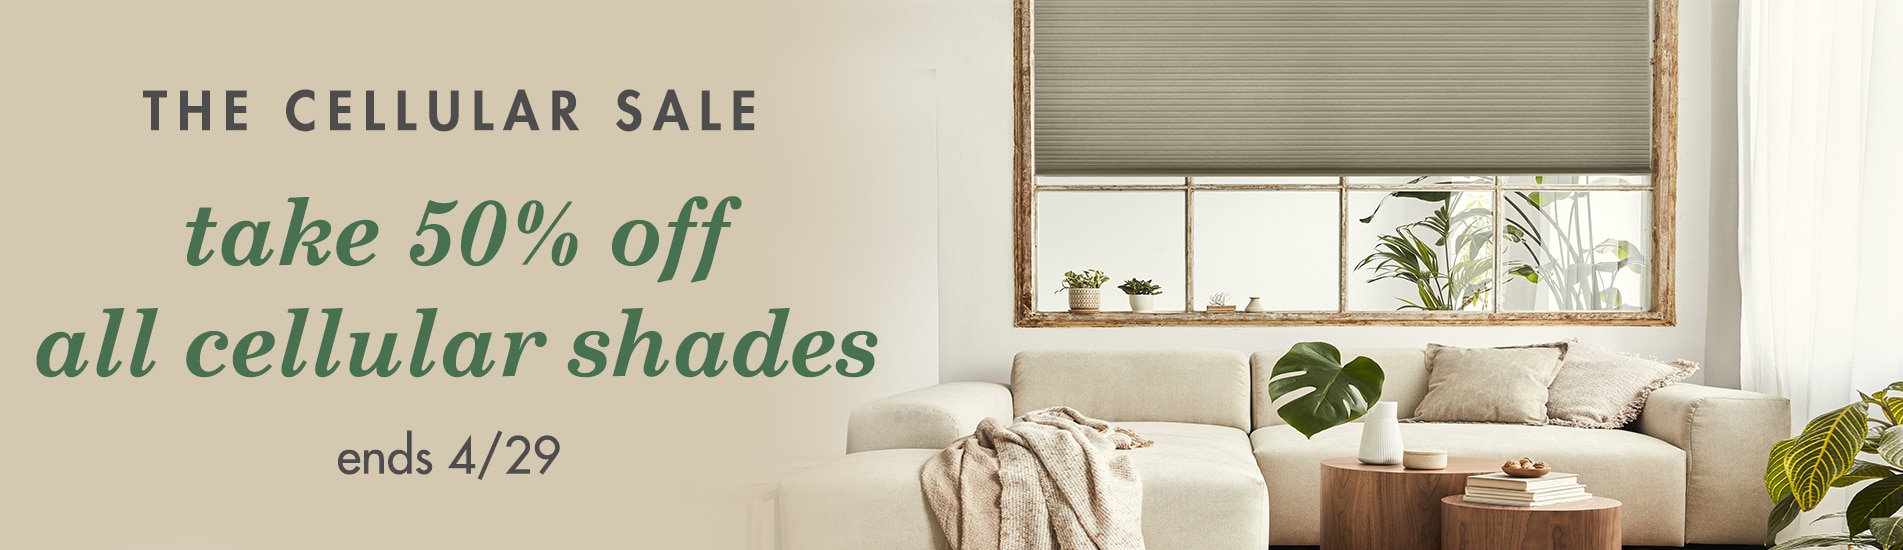 The Cellular Sale Starts Now, Take Up to 50% off Cellular Shades